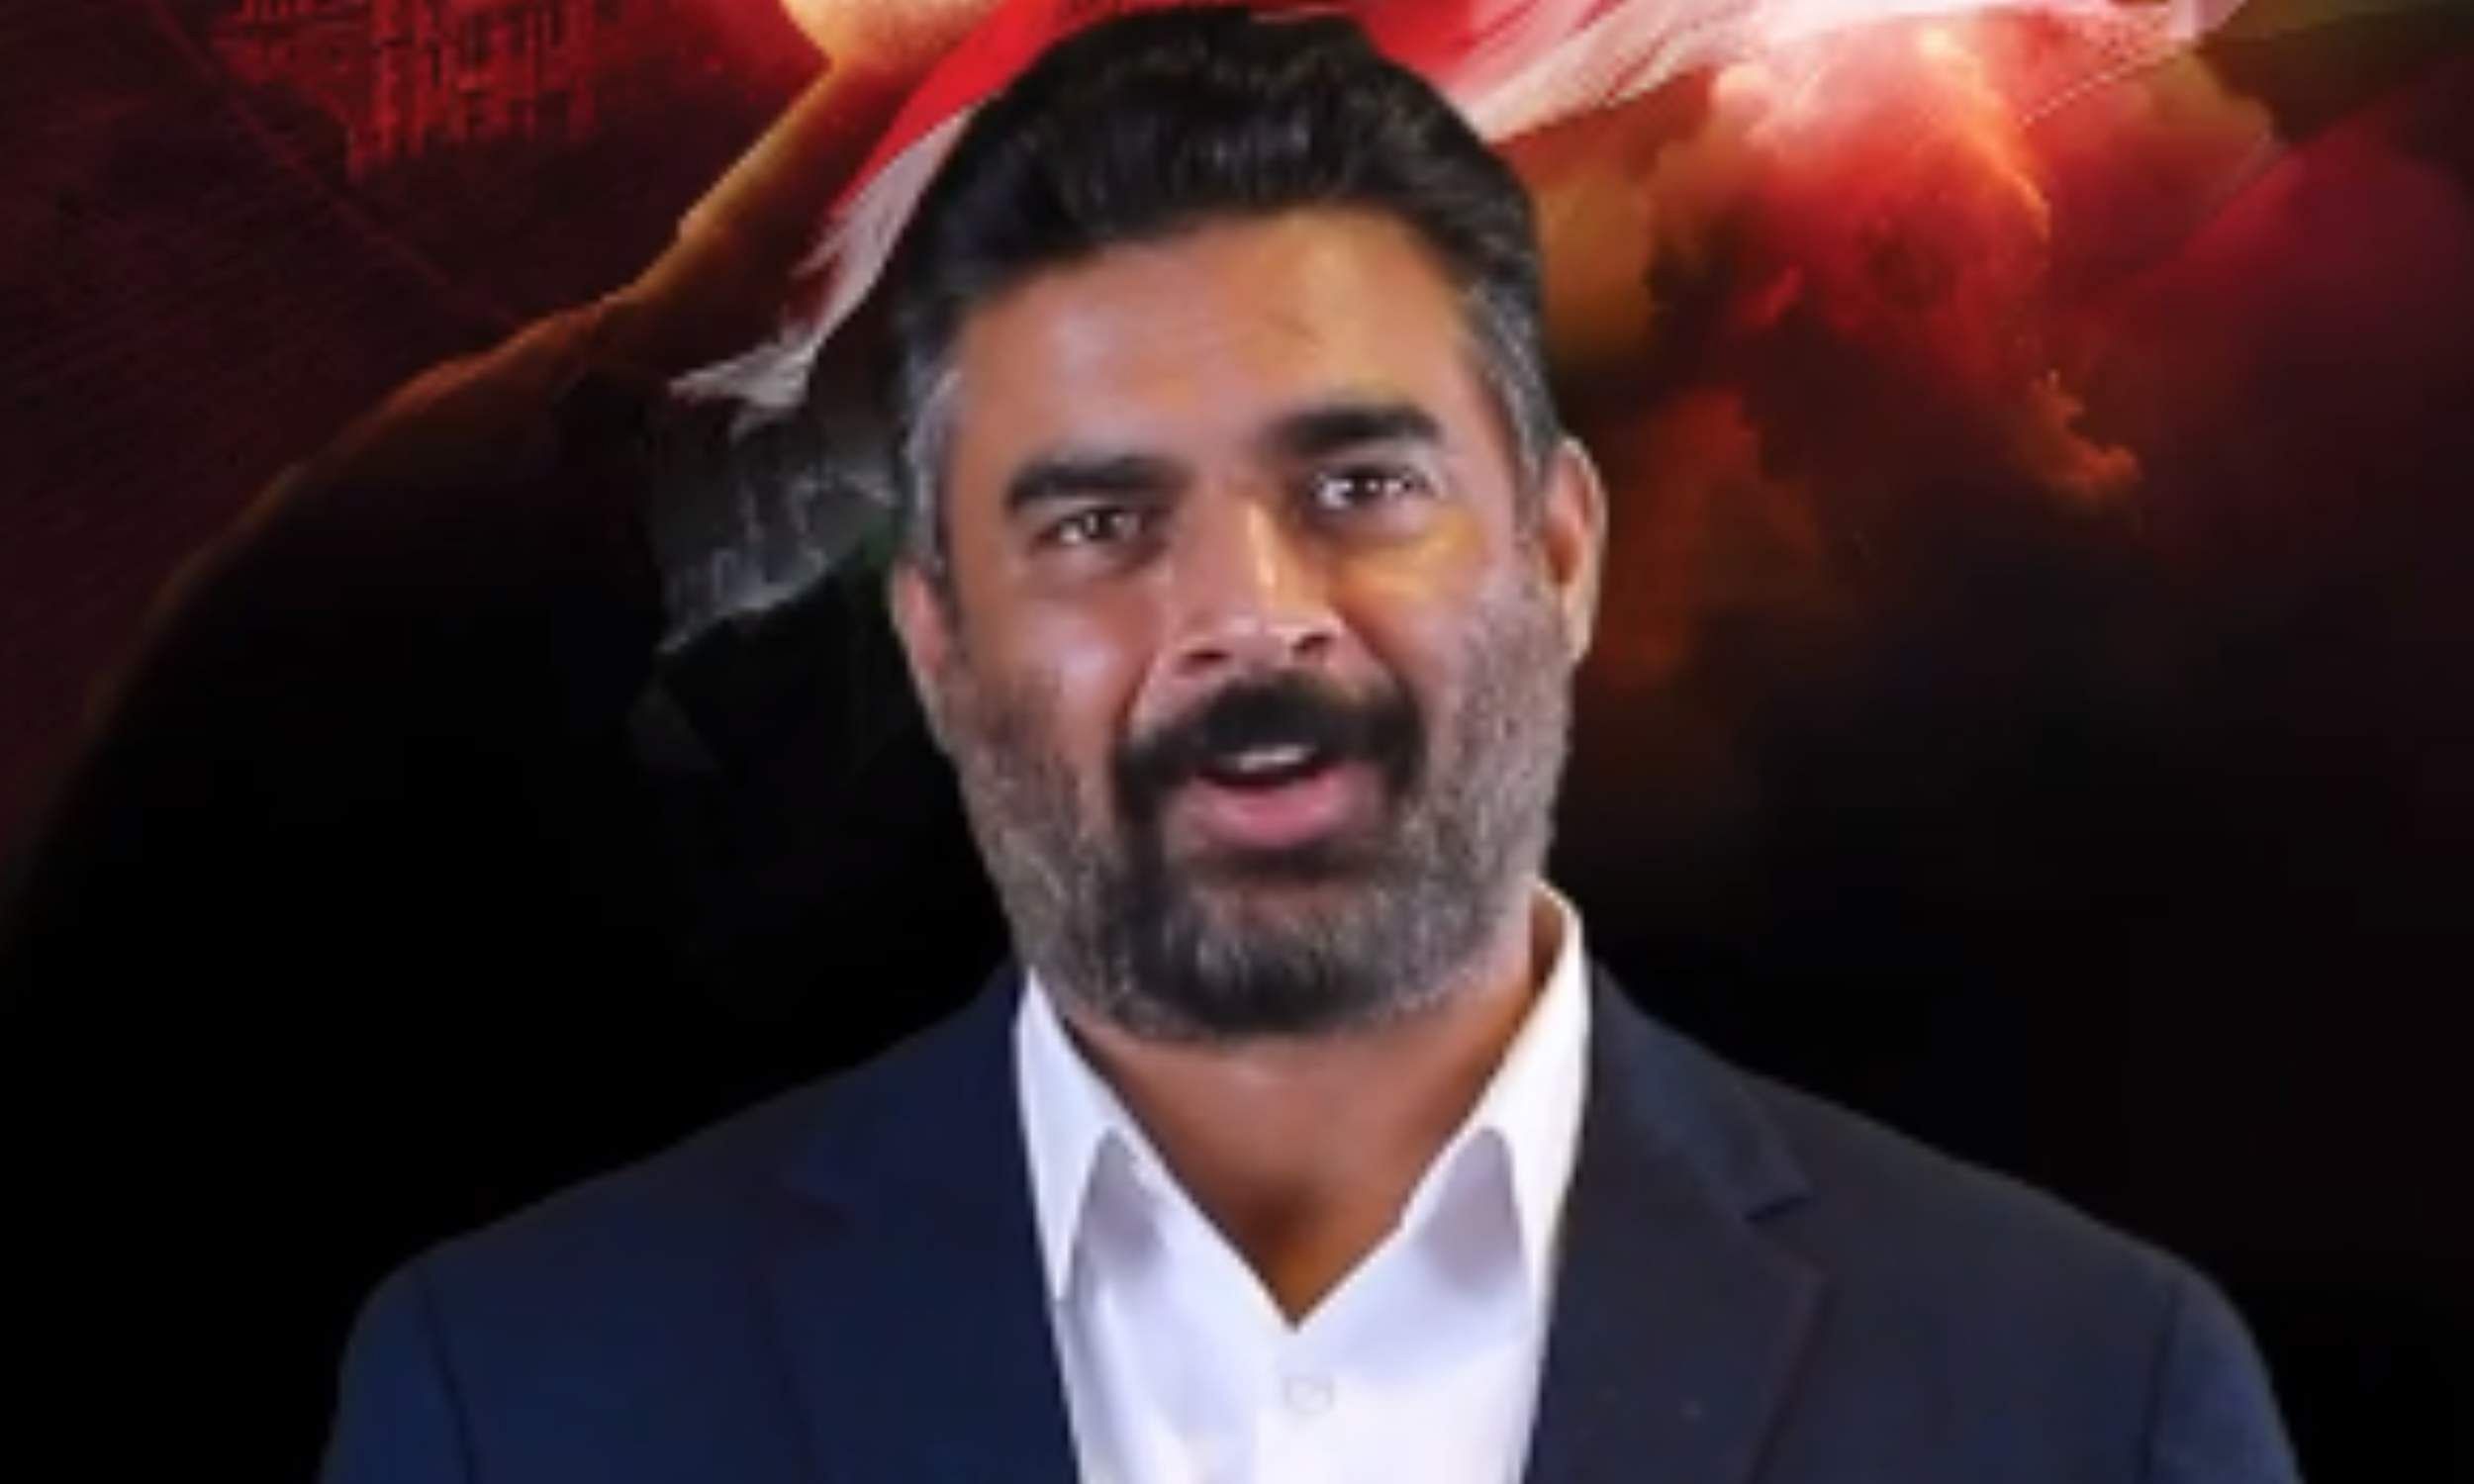 “I deserve this”: Madhavan after being trolled for claiming that ISRO used panchang for Mars mission